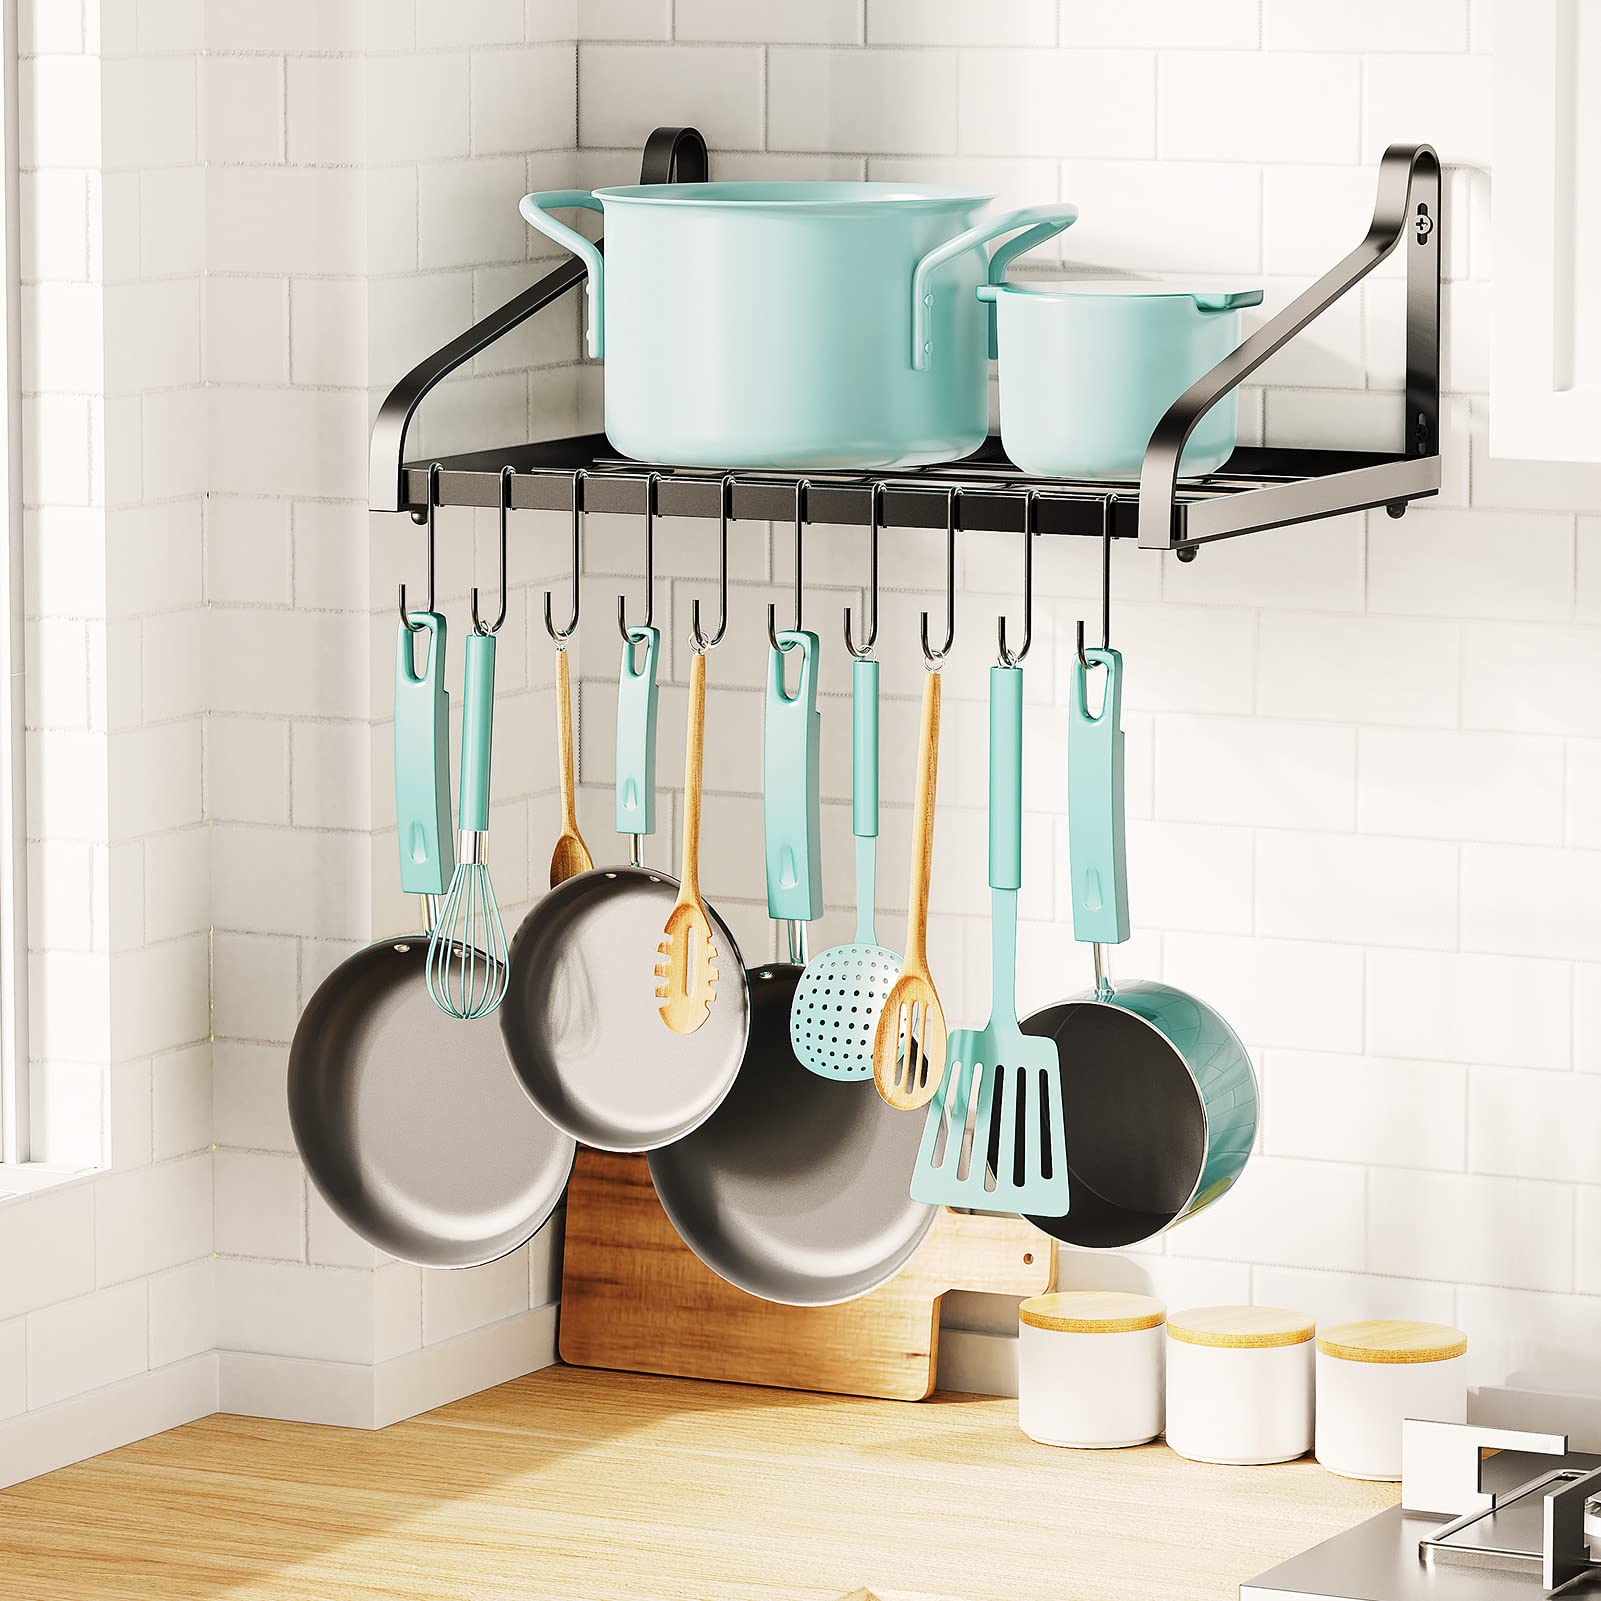 MUDEELA Pots and Pans Organizer for Cabinet, 8 Tier Pot Rack with